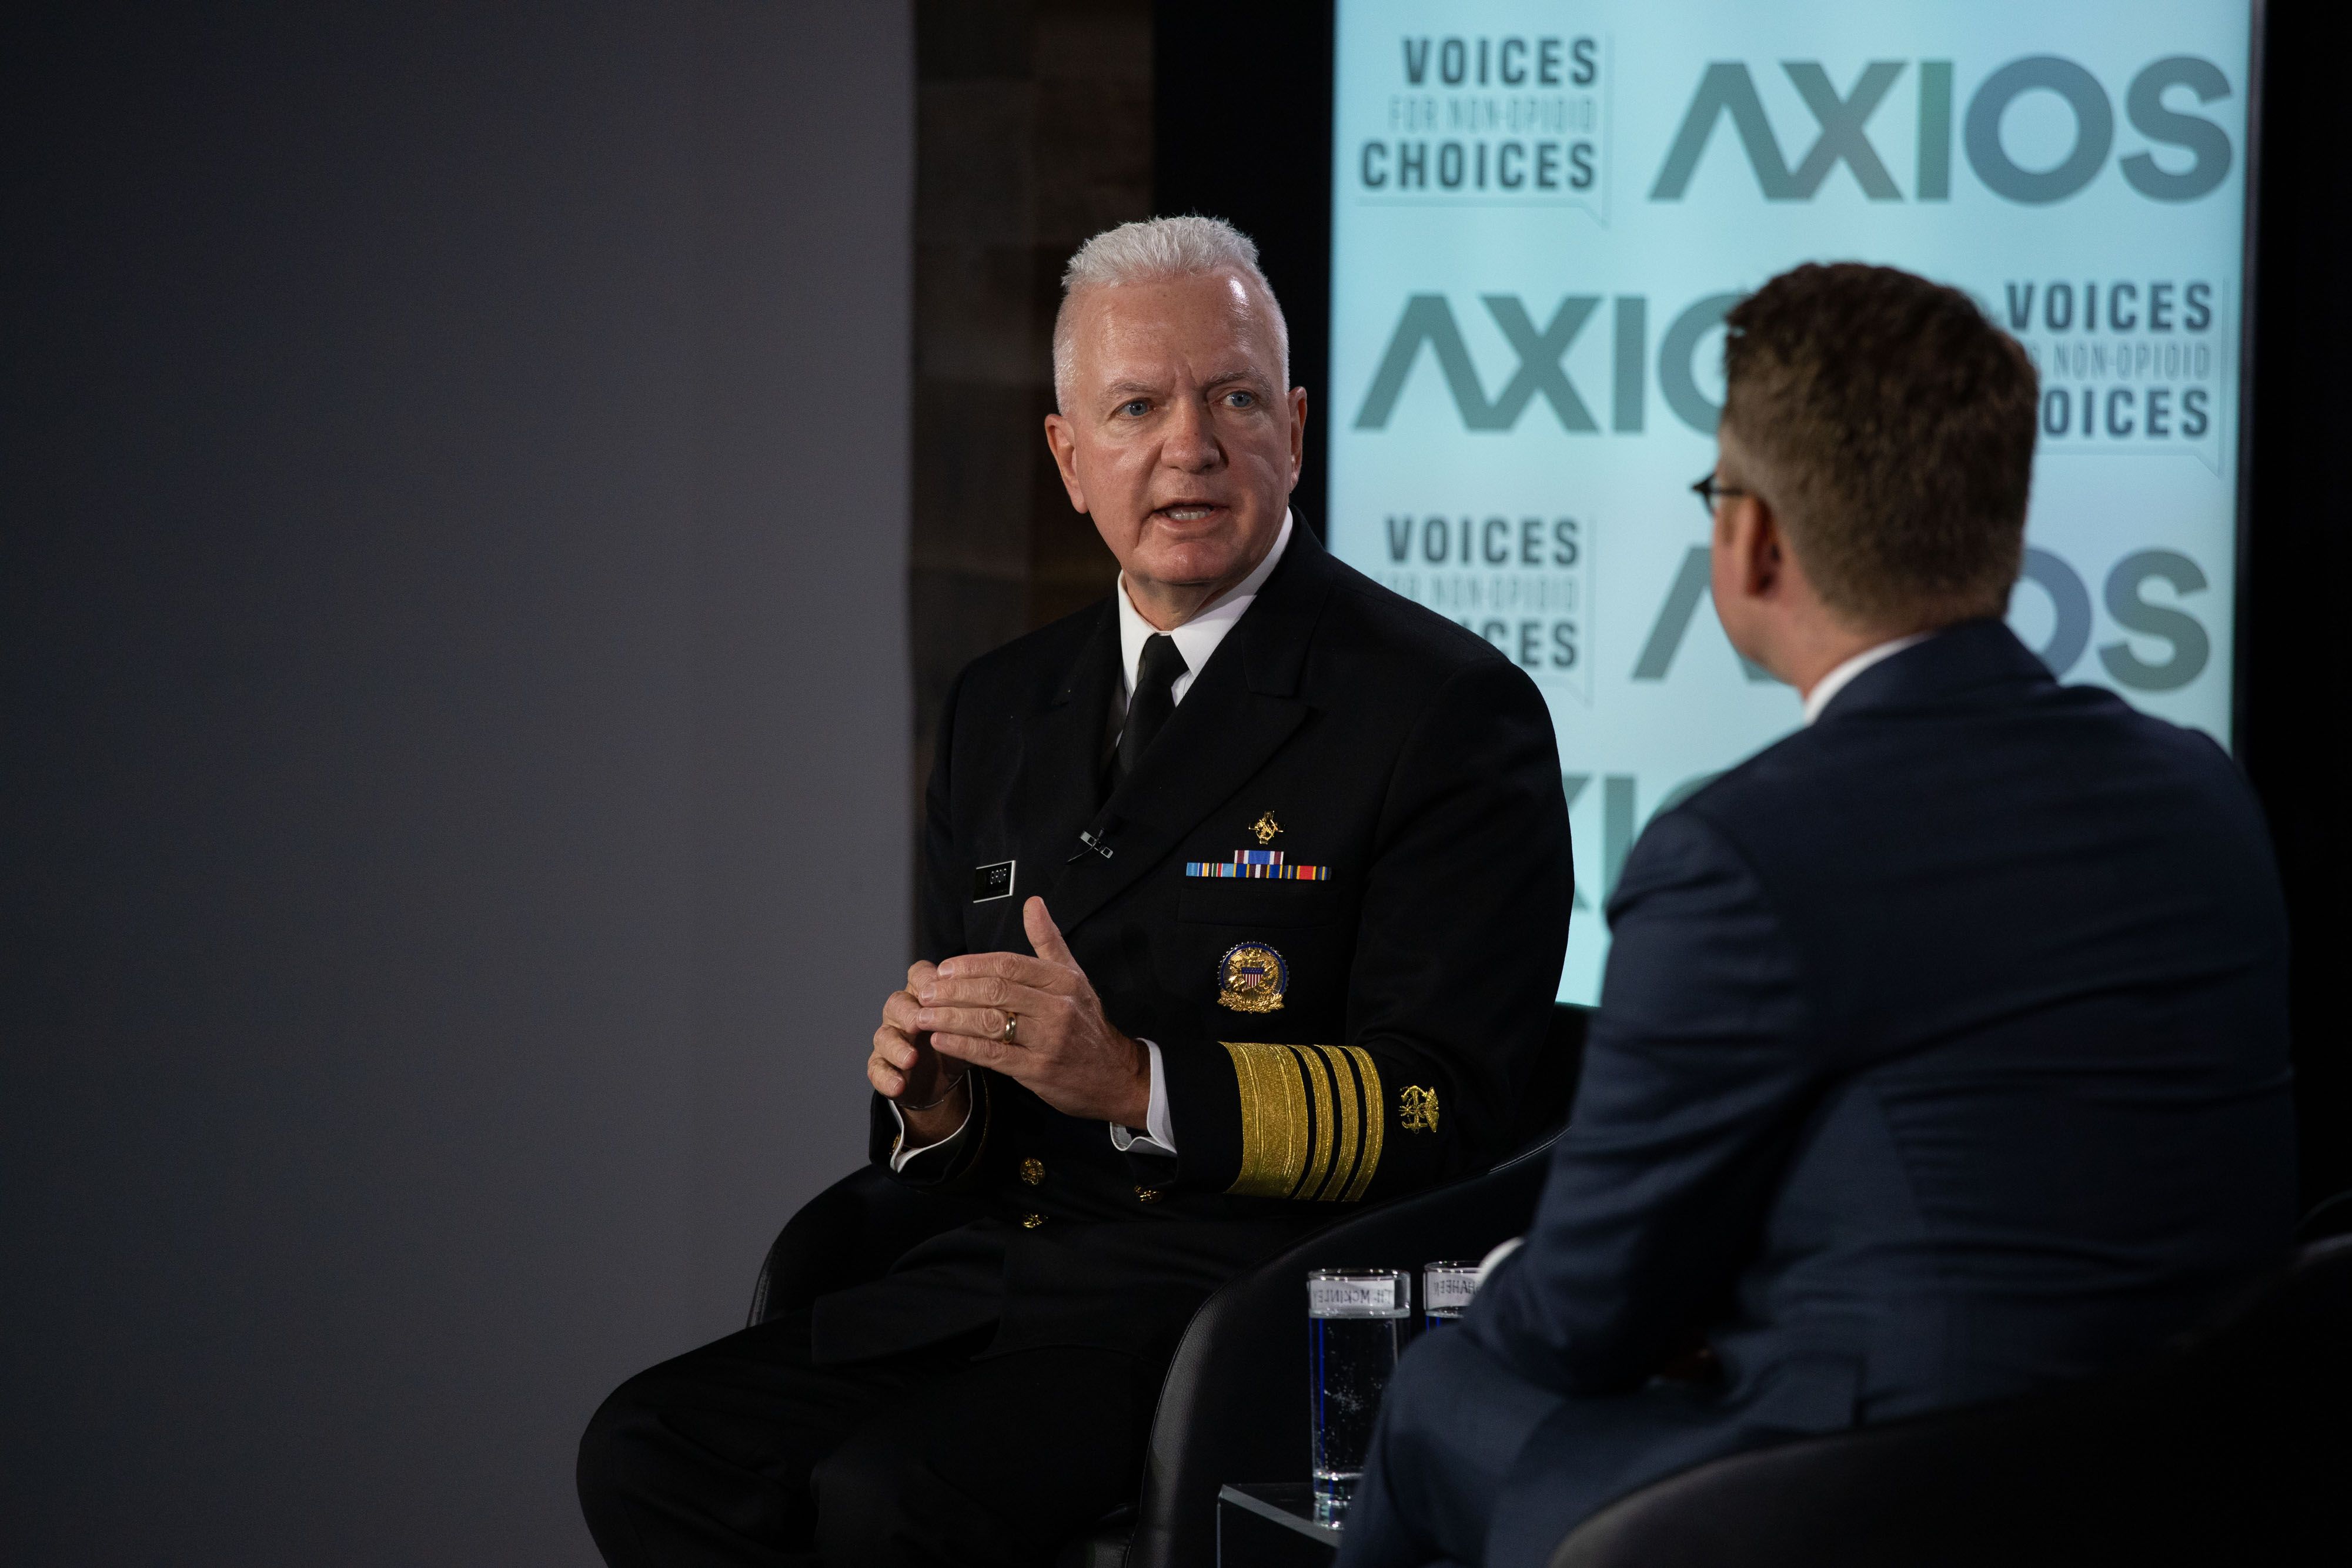 Admiral Brett Giroir, Health and Senior Adviser on Opioid Policy at the U.S. Department of Health and Human Services on stage Thursday morning.